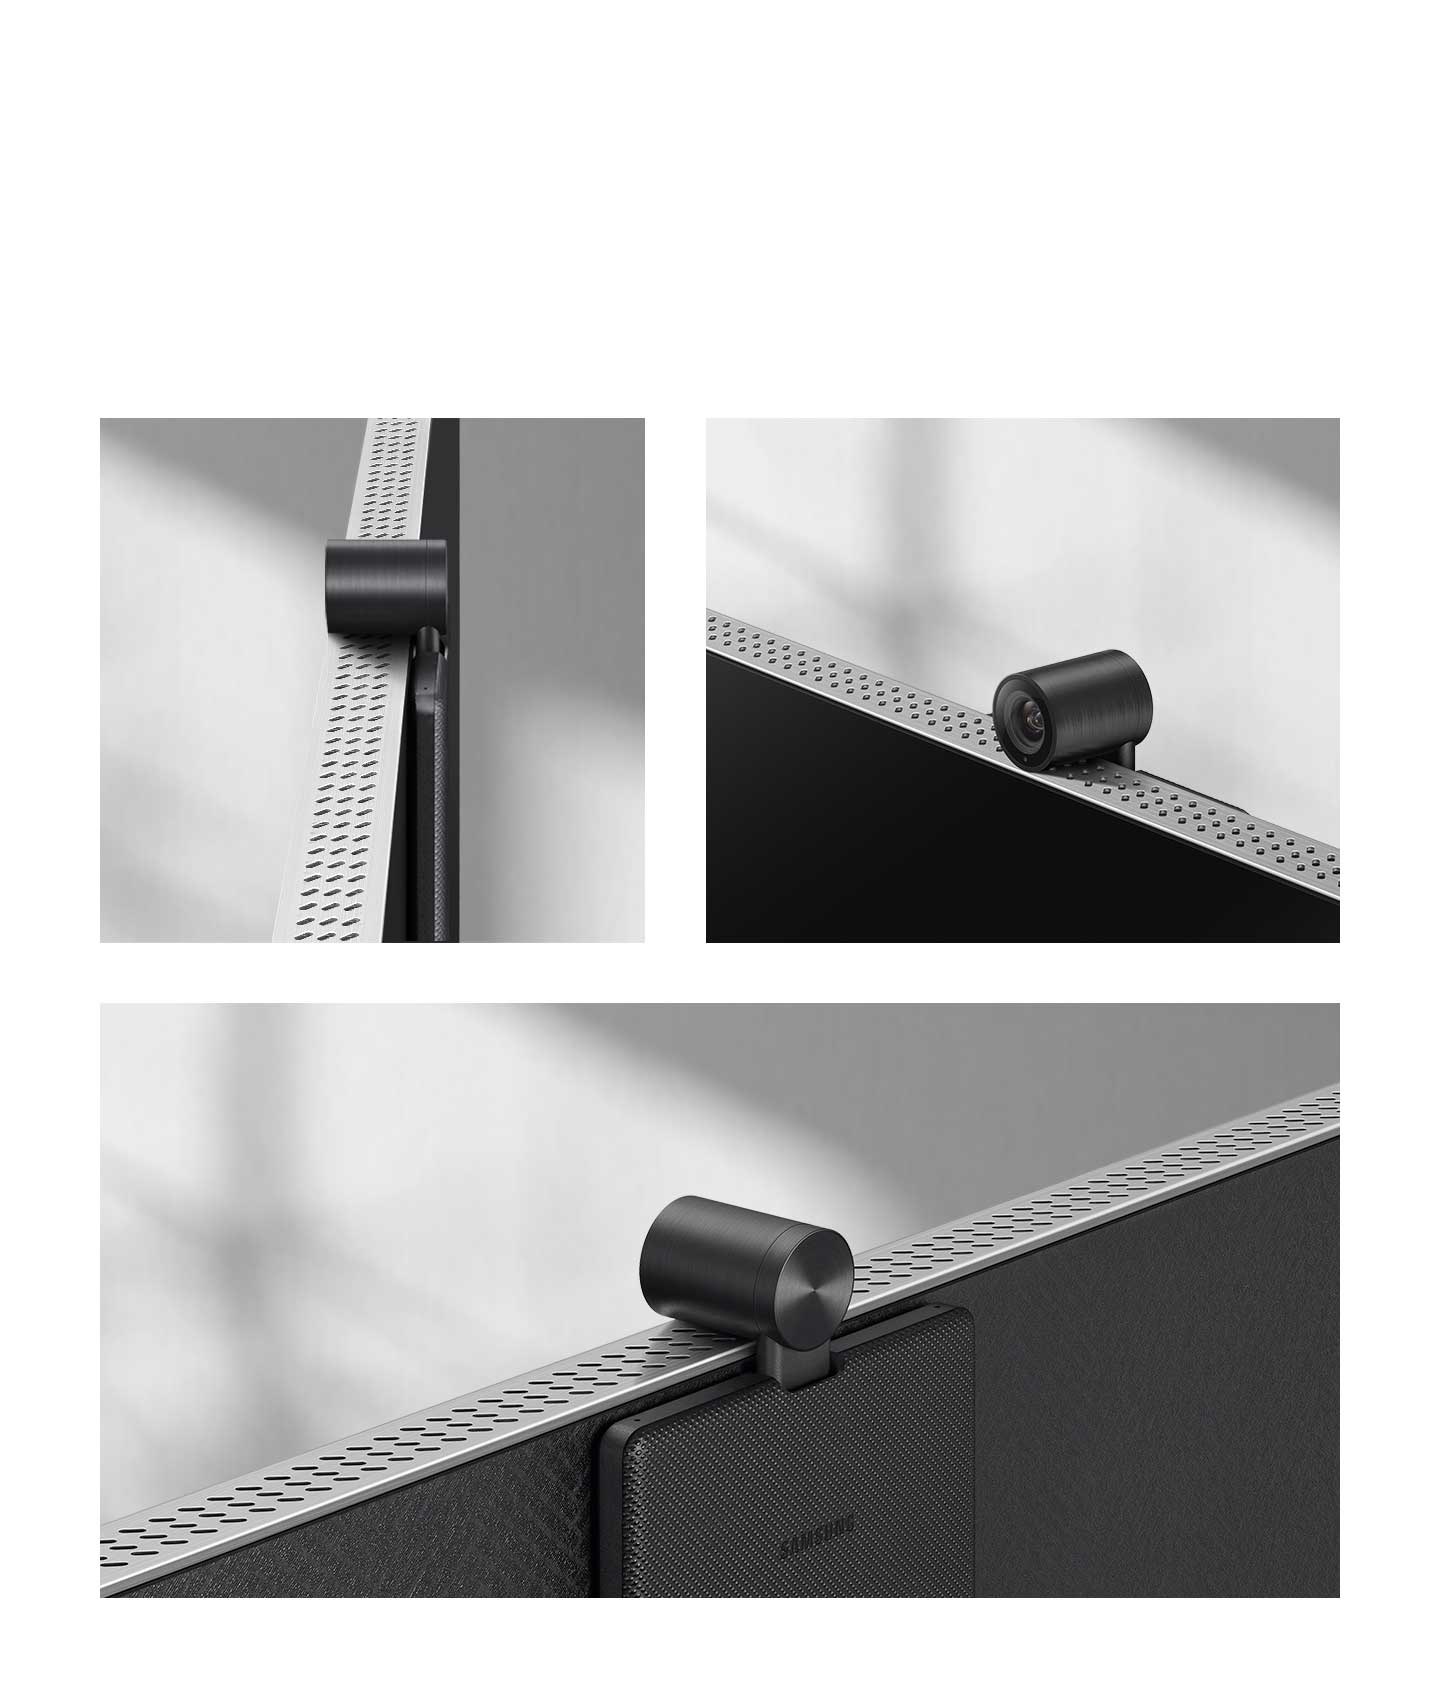 A Slim Fit Cam is magnetically attached to a TV.